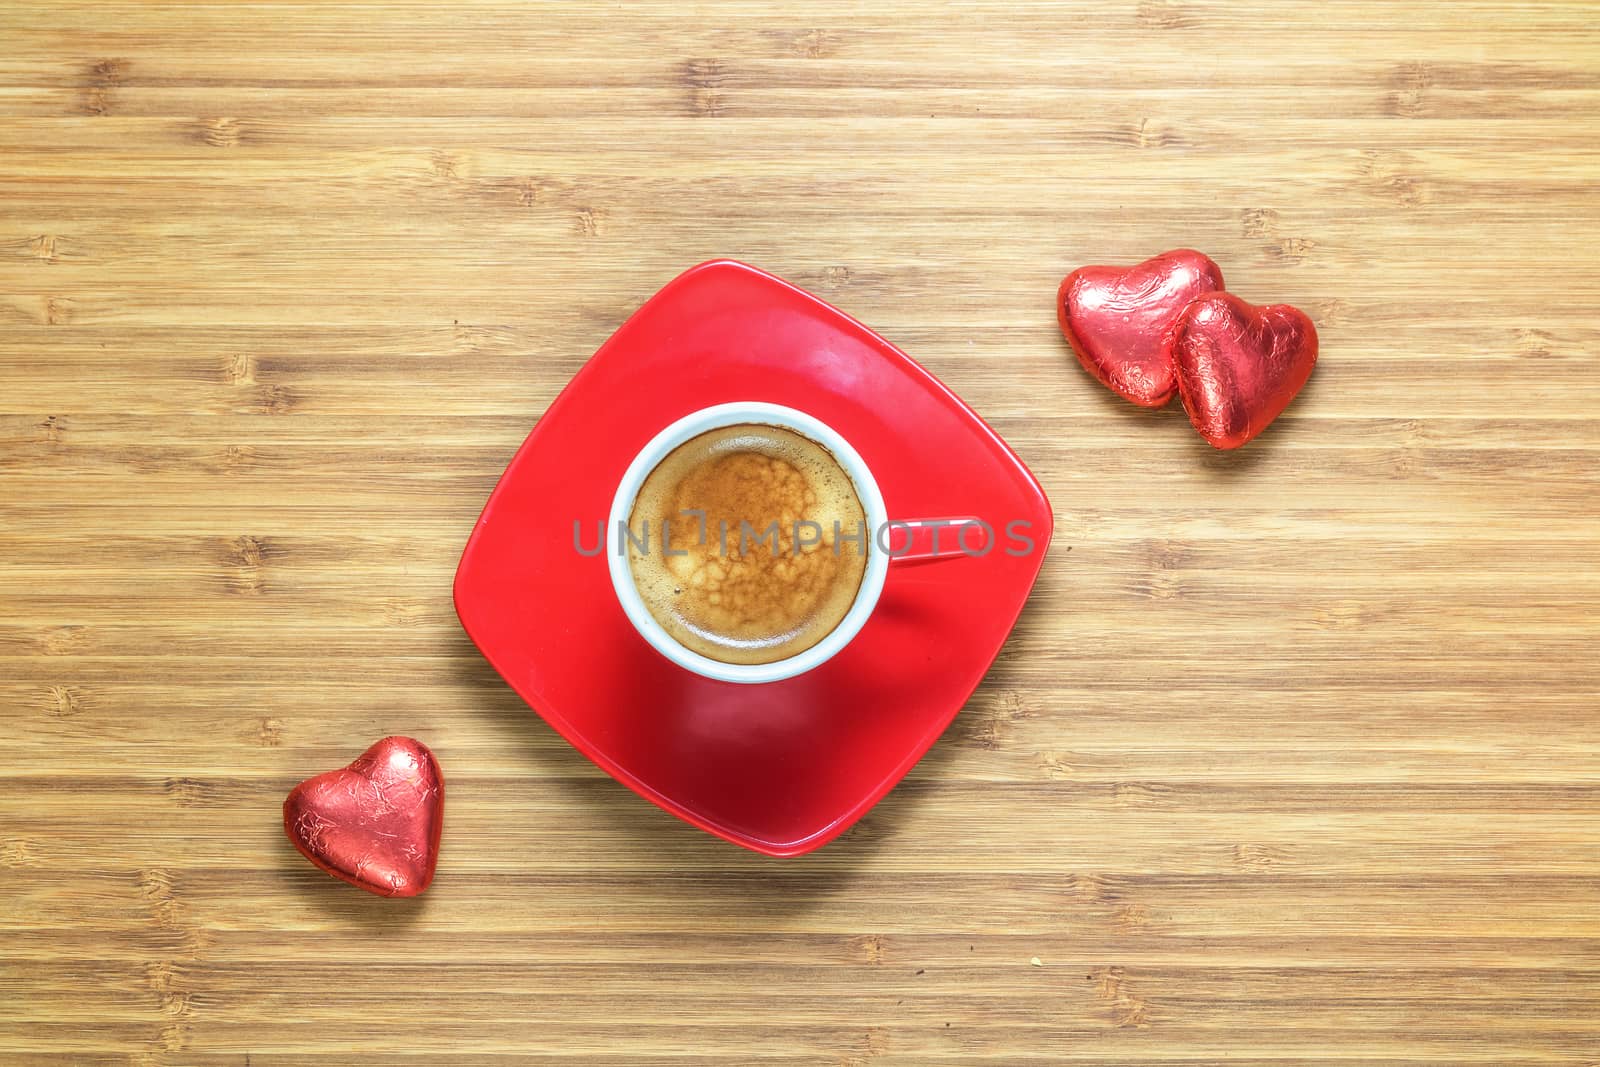 Heart shaped sweets wrapped in a bright red foil lying on a wooden texture with red cup of coffe near it. Background for romantic themes.